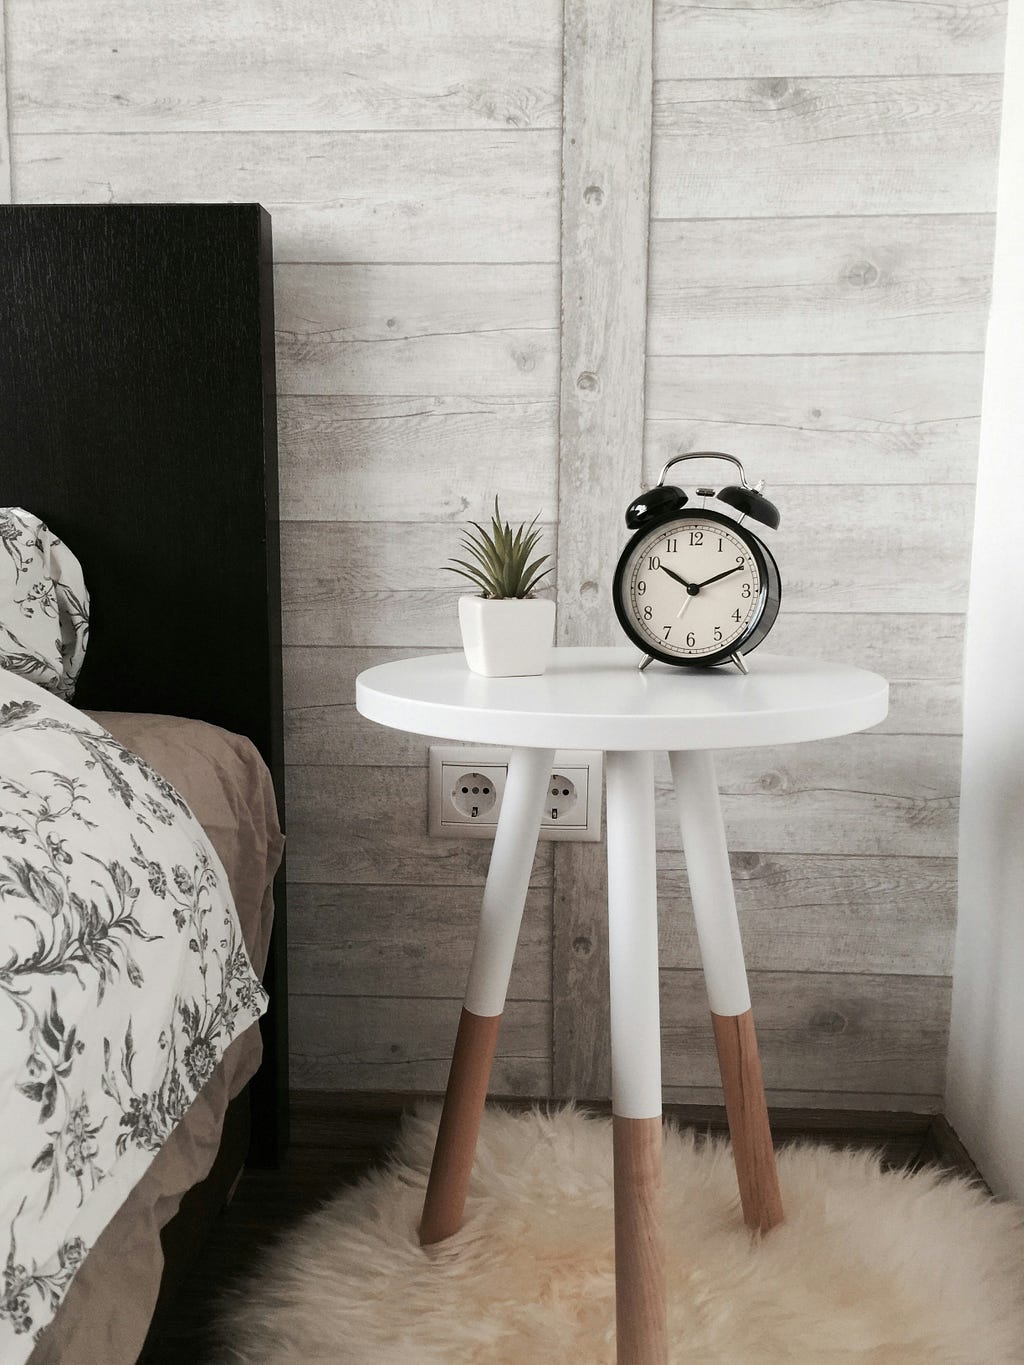 an old fashioned alarm clock on a white bed side table